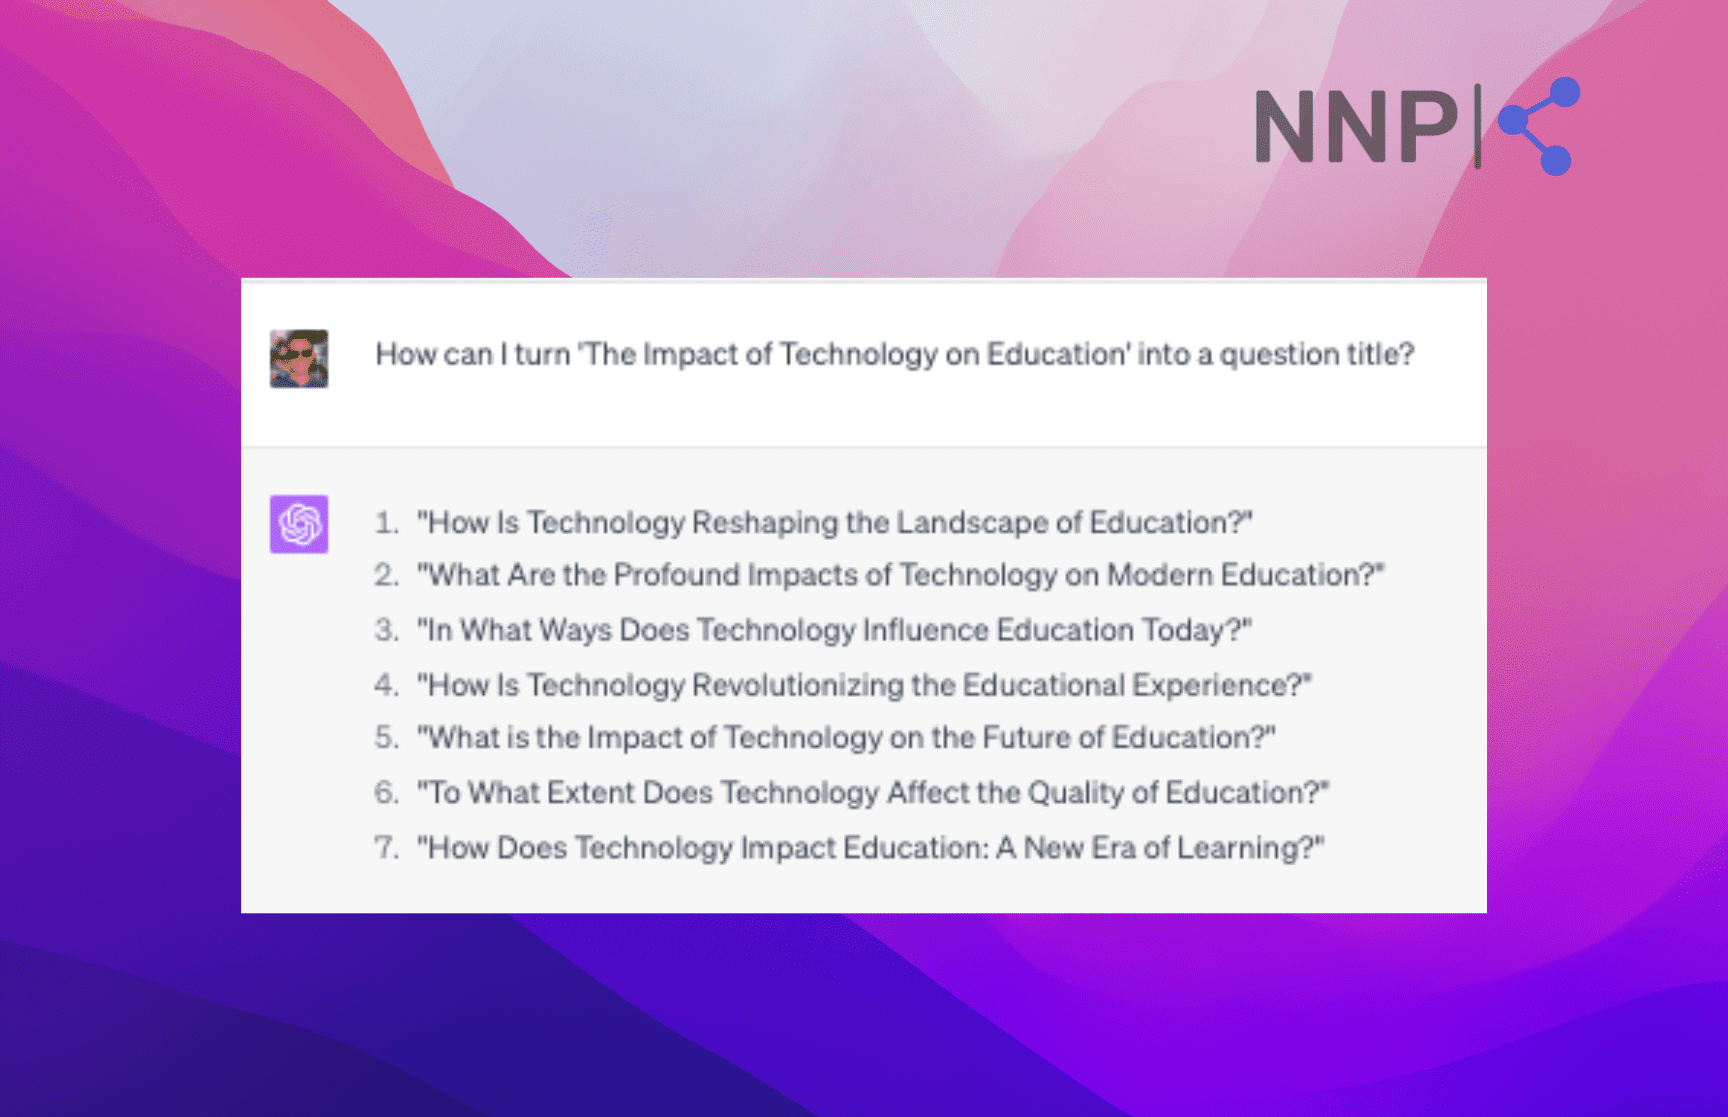 "How can I turn 'The Impact of Technology on Education' into a question title?"